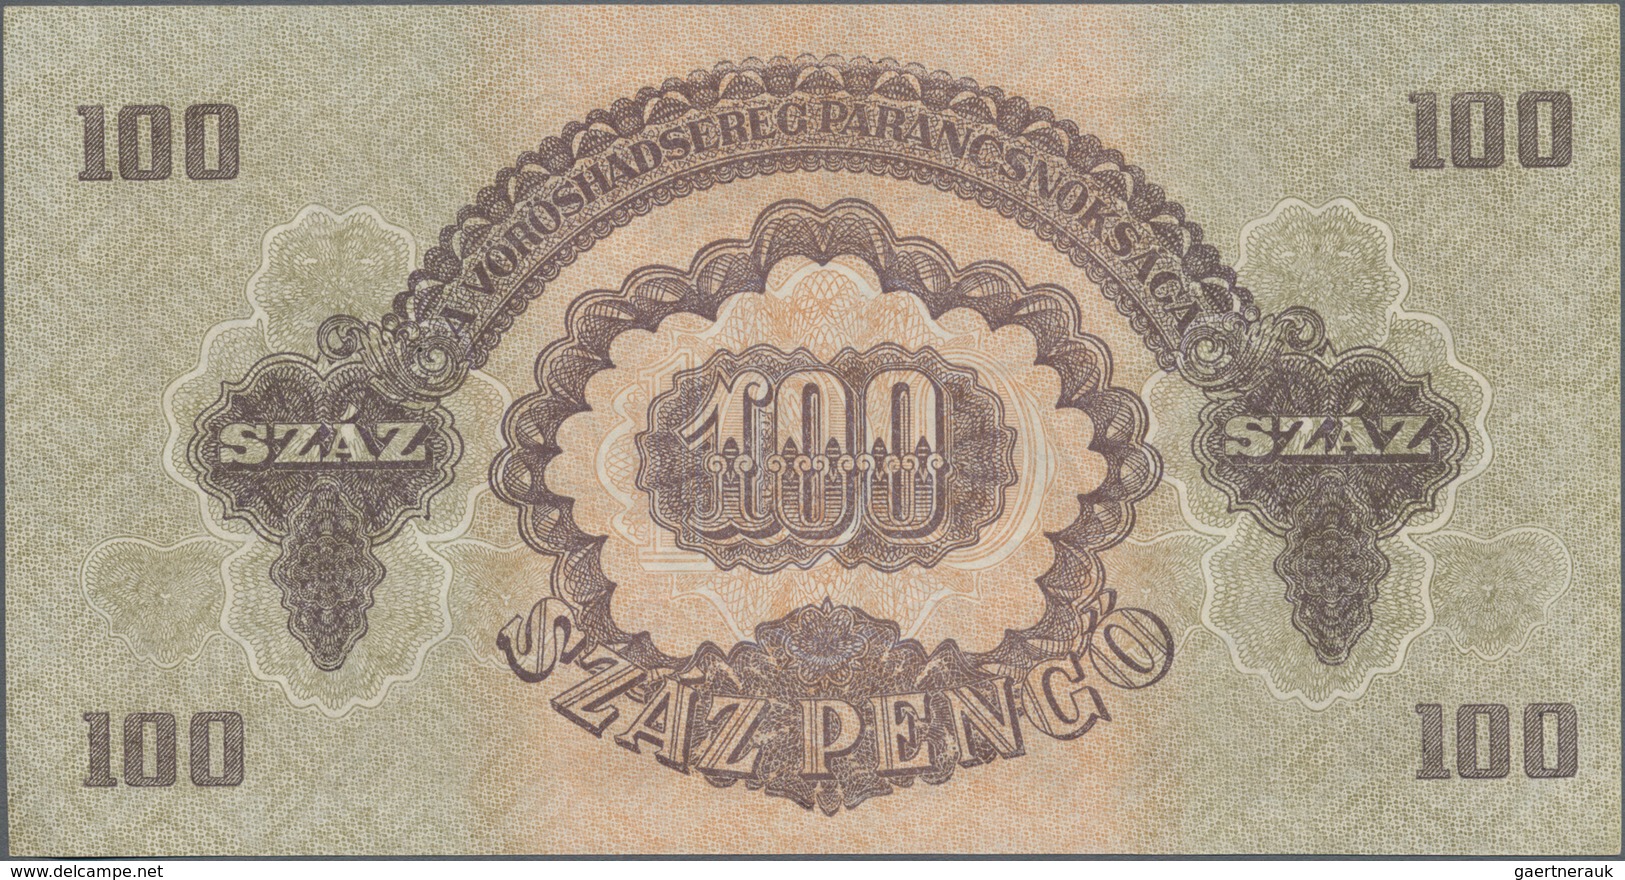 Hungary / Ungarn: Russian Occupation 1944, set with 10 banknotes 3x 1 Pengö (VF/XF), 2 (aUNC), 5 (aU